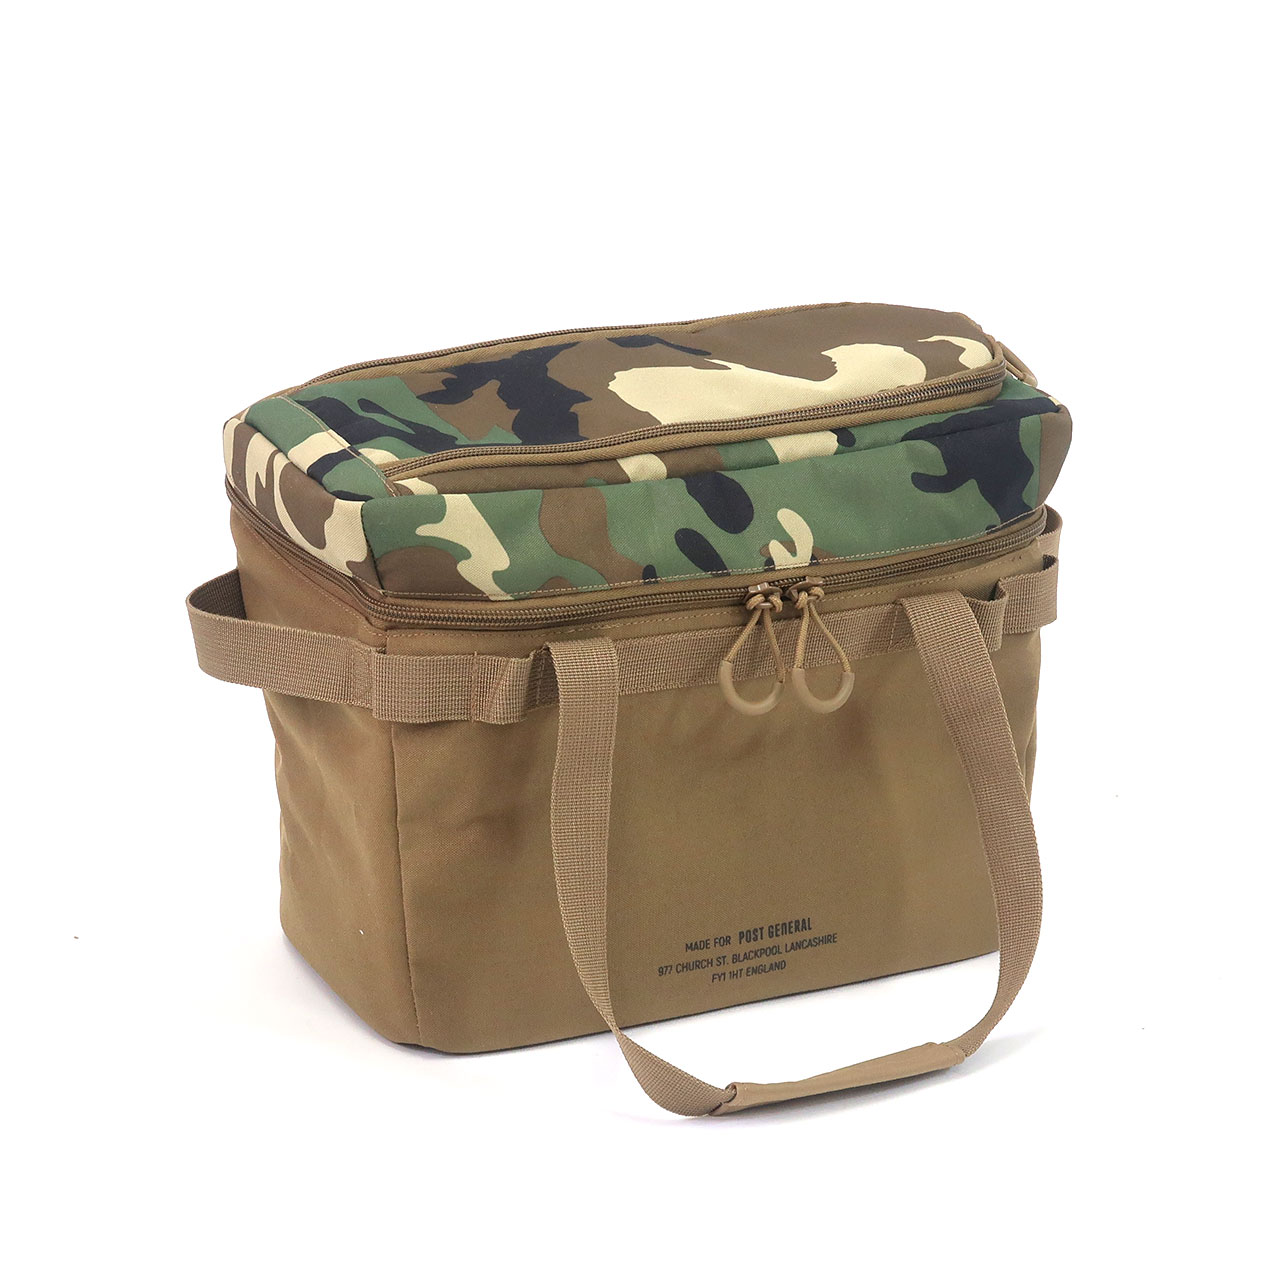 POST GENERAL FIELD BAG for HD BASKET WOLFCAMO